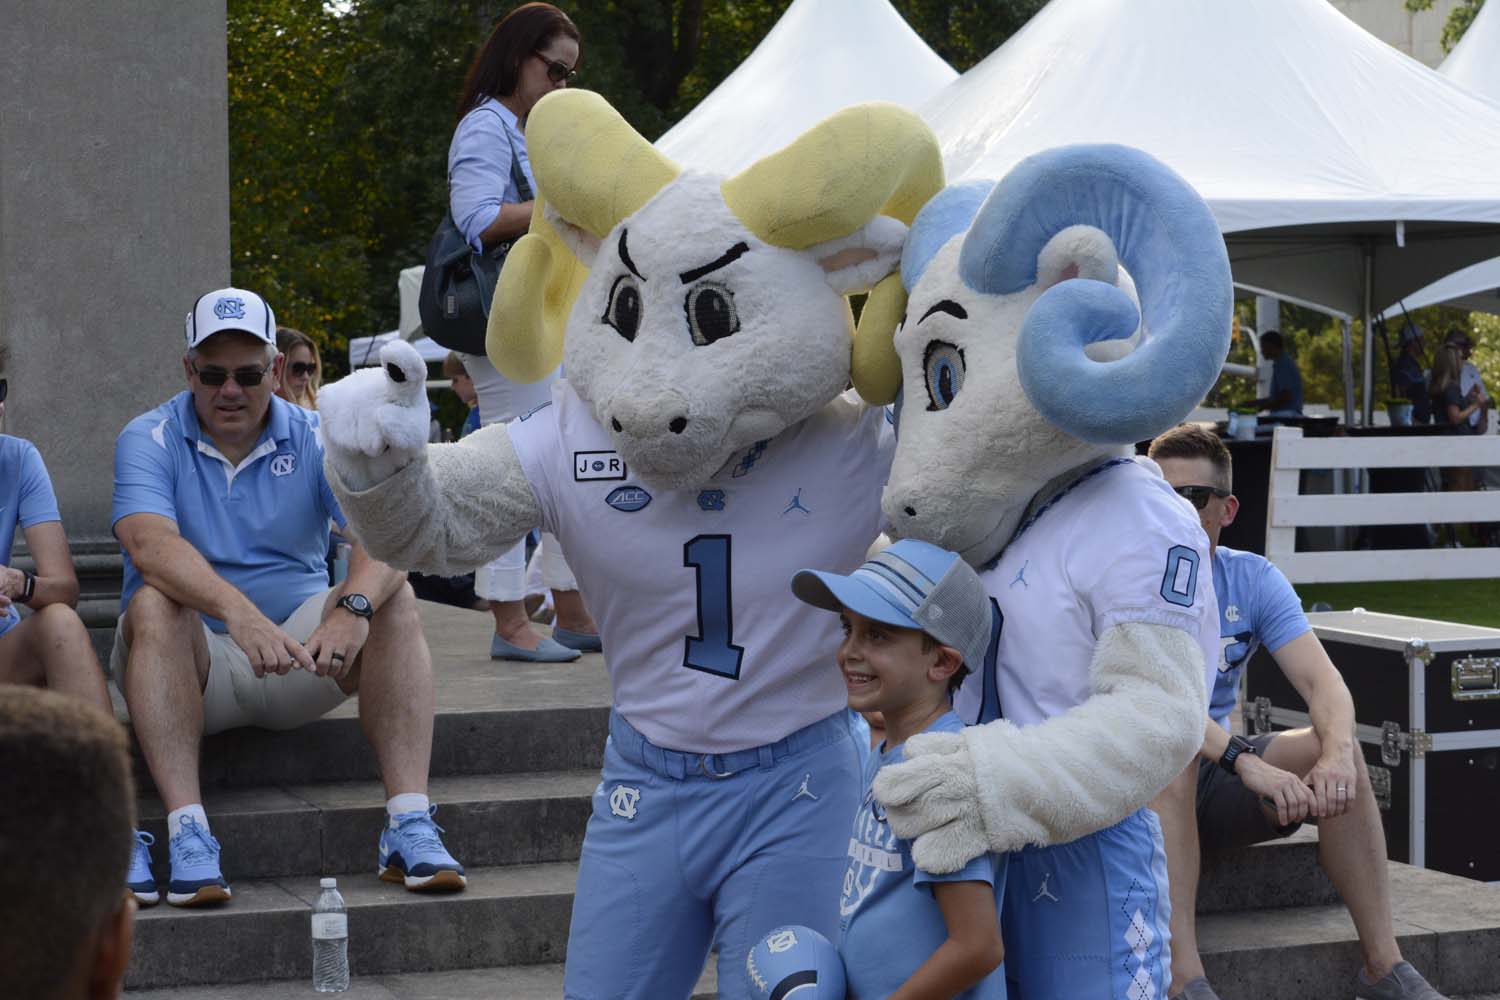 Tickets Sold Out for UNC Football Home Game vs. Duke - Chapelboro.com